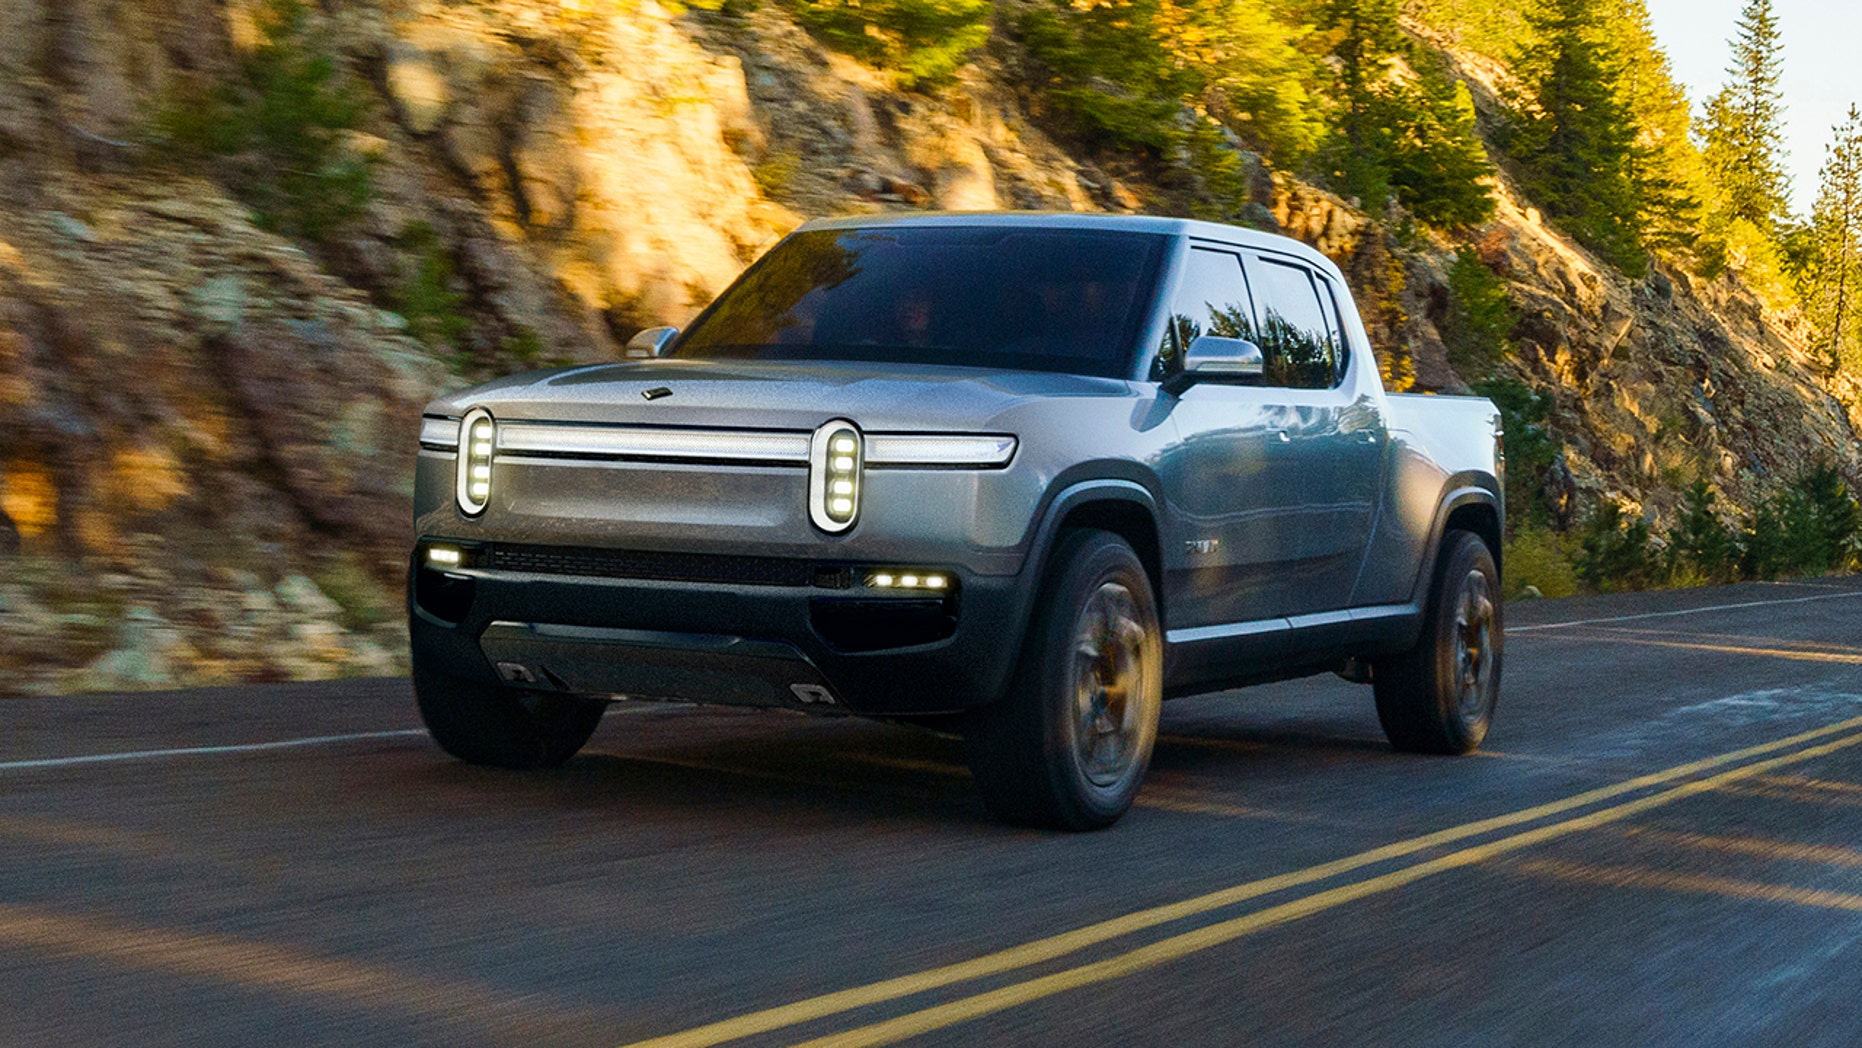 The Rivian R1T is the American-made electric pickup of the near future